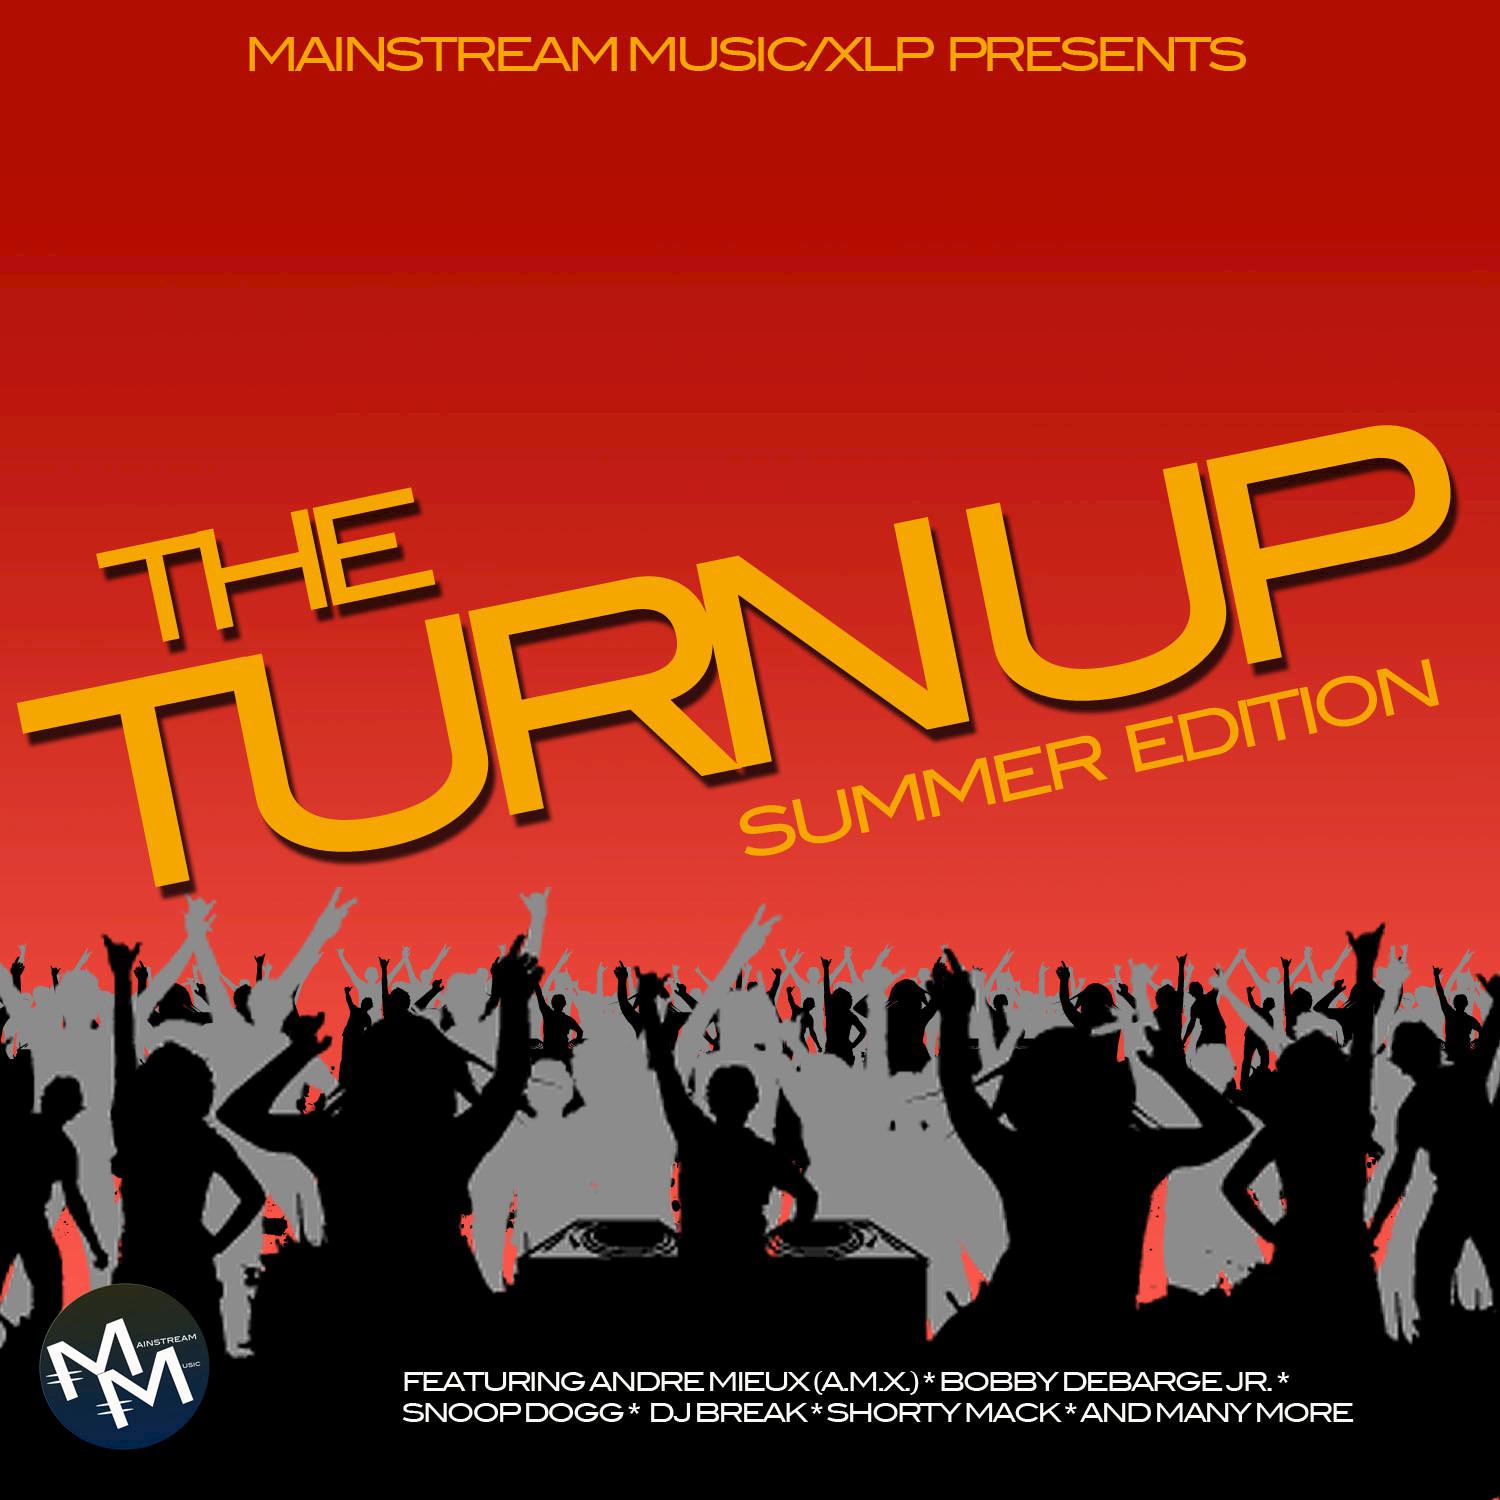 Mainstream Music Presents: The Turn Up (Summer Edition)